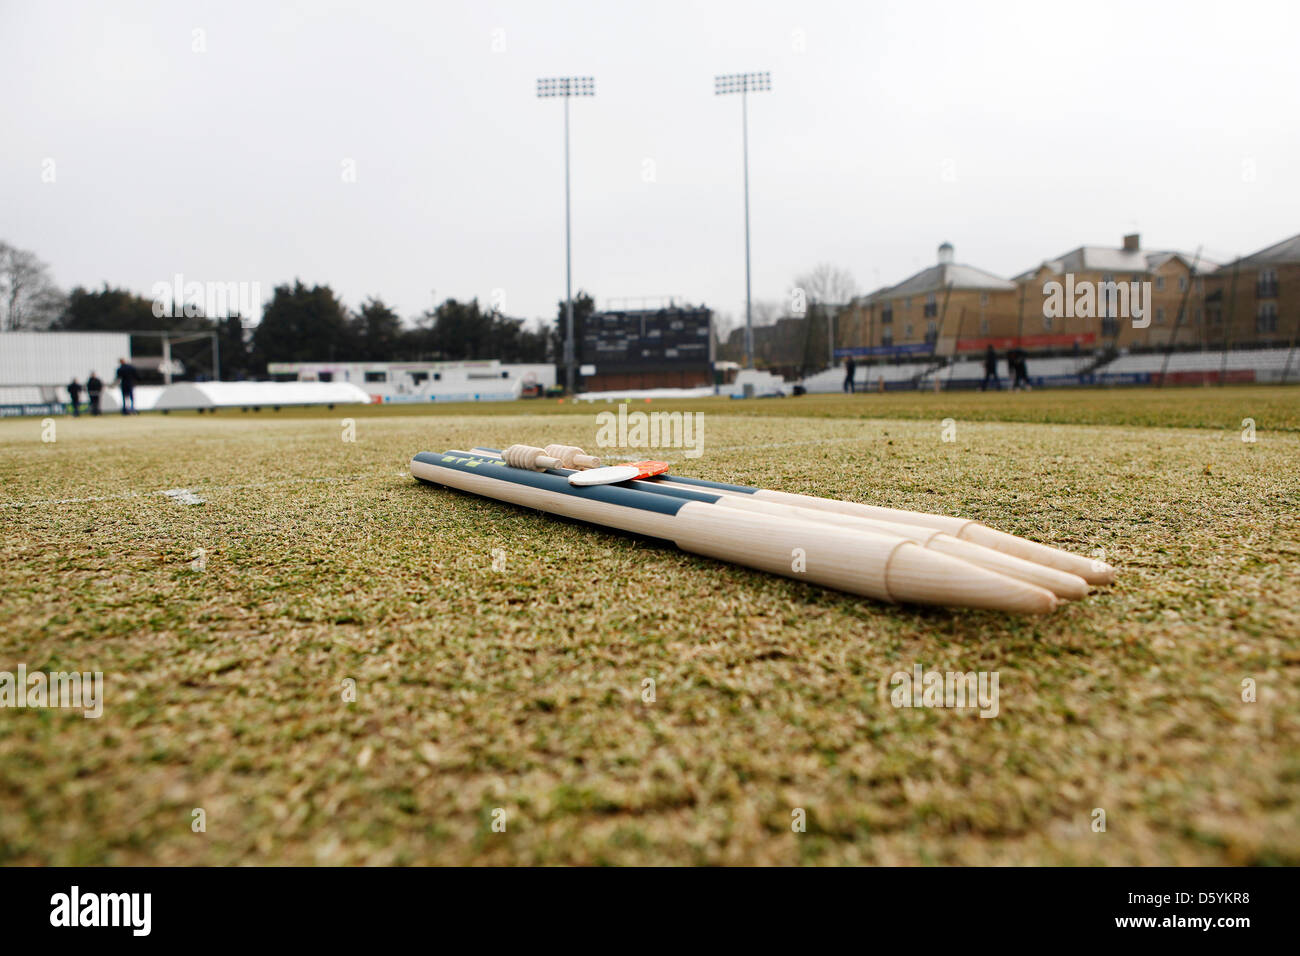 Chelmsford, Essex, UK. 10th April 2013. The stumps and pitch prior to the first game of the season - LV County Championship -  Essex CCC vs Gloucestershire CCC. Credit: Action Plus Sports Images / Alamy Live News Stock Photo